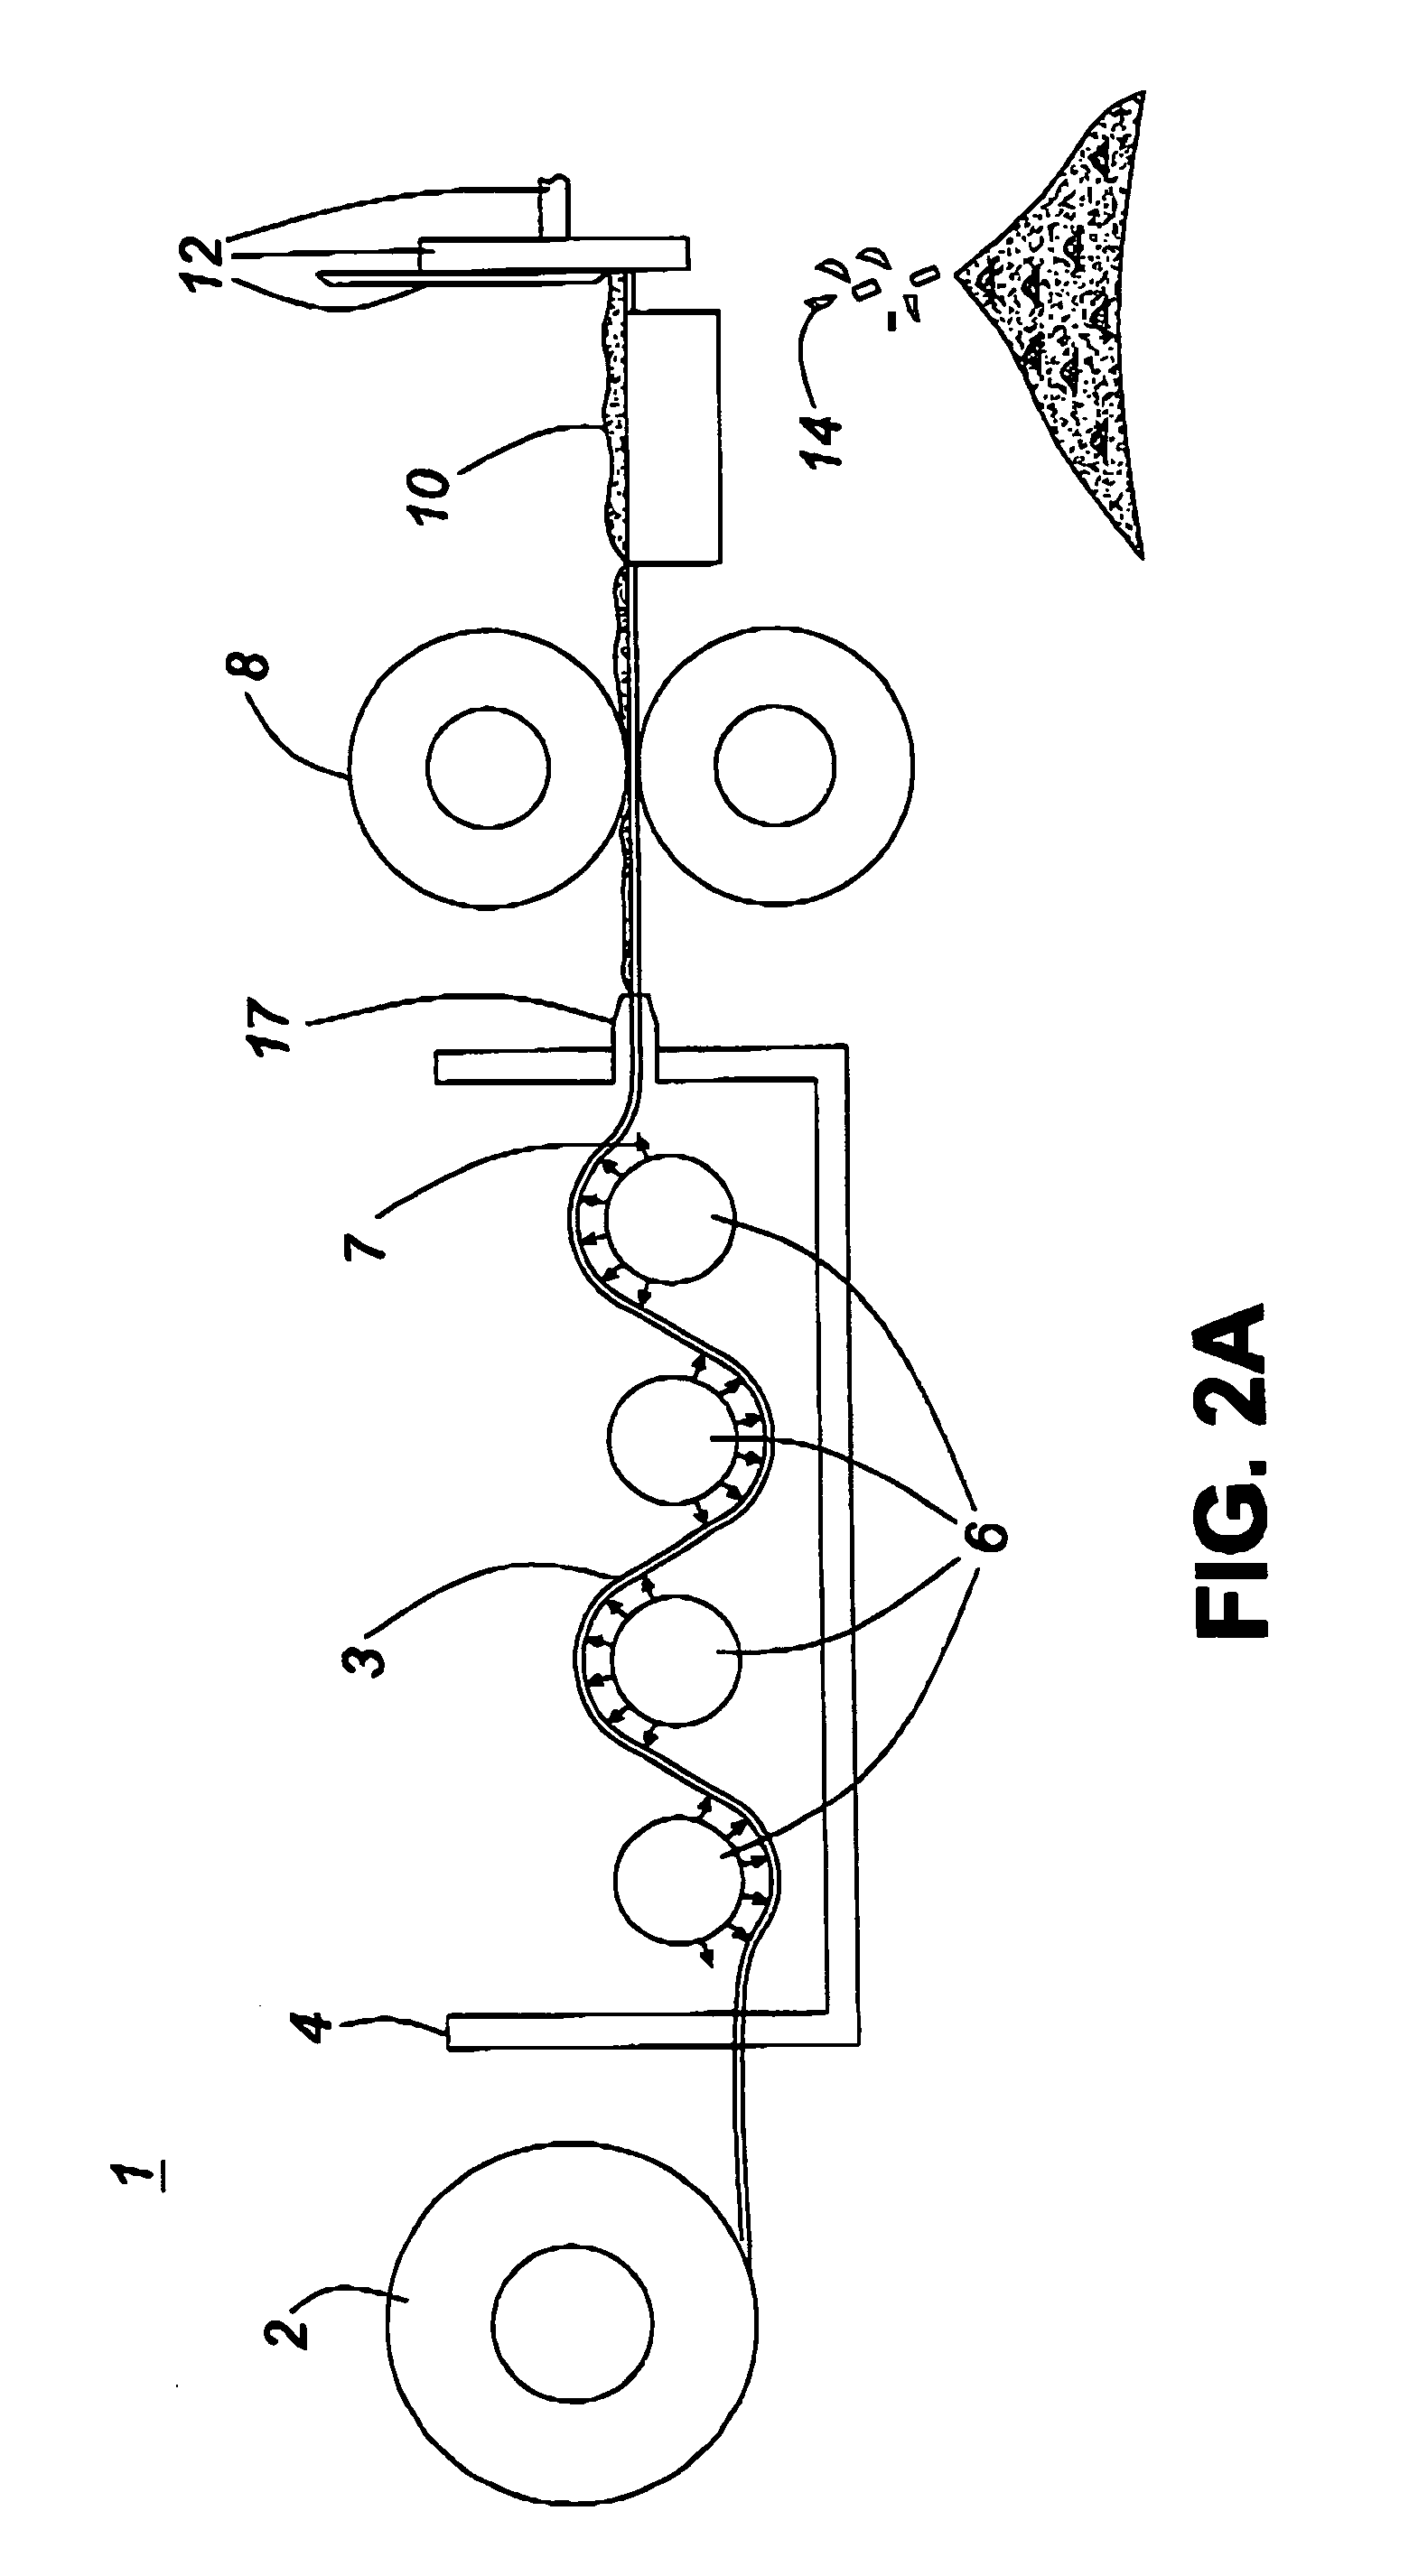 Method and apparatus for fabrication of polymer-coated fibers